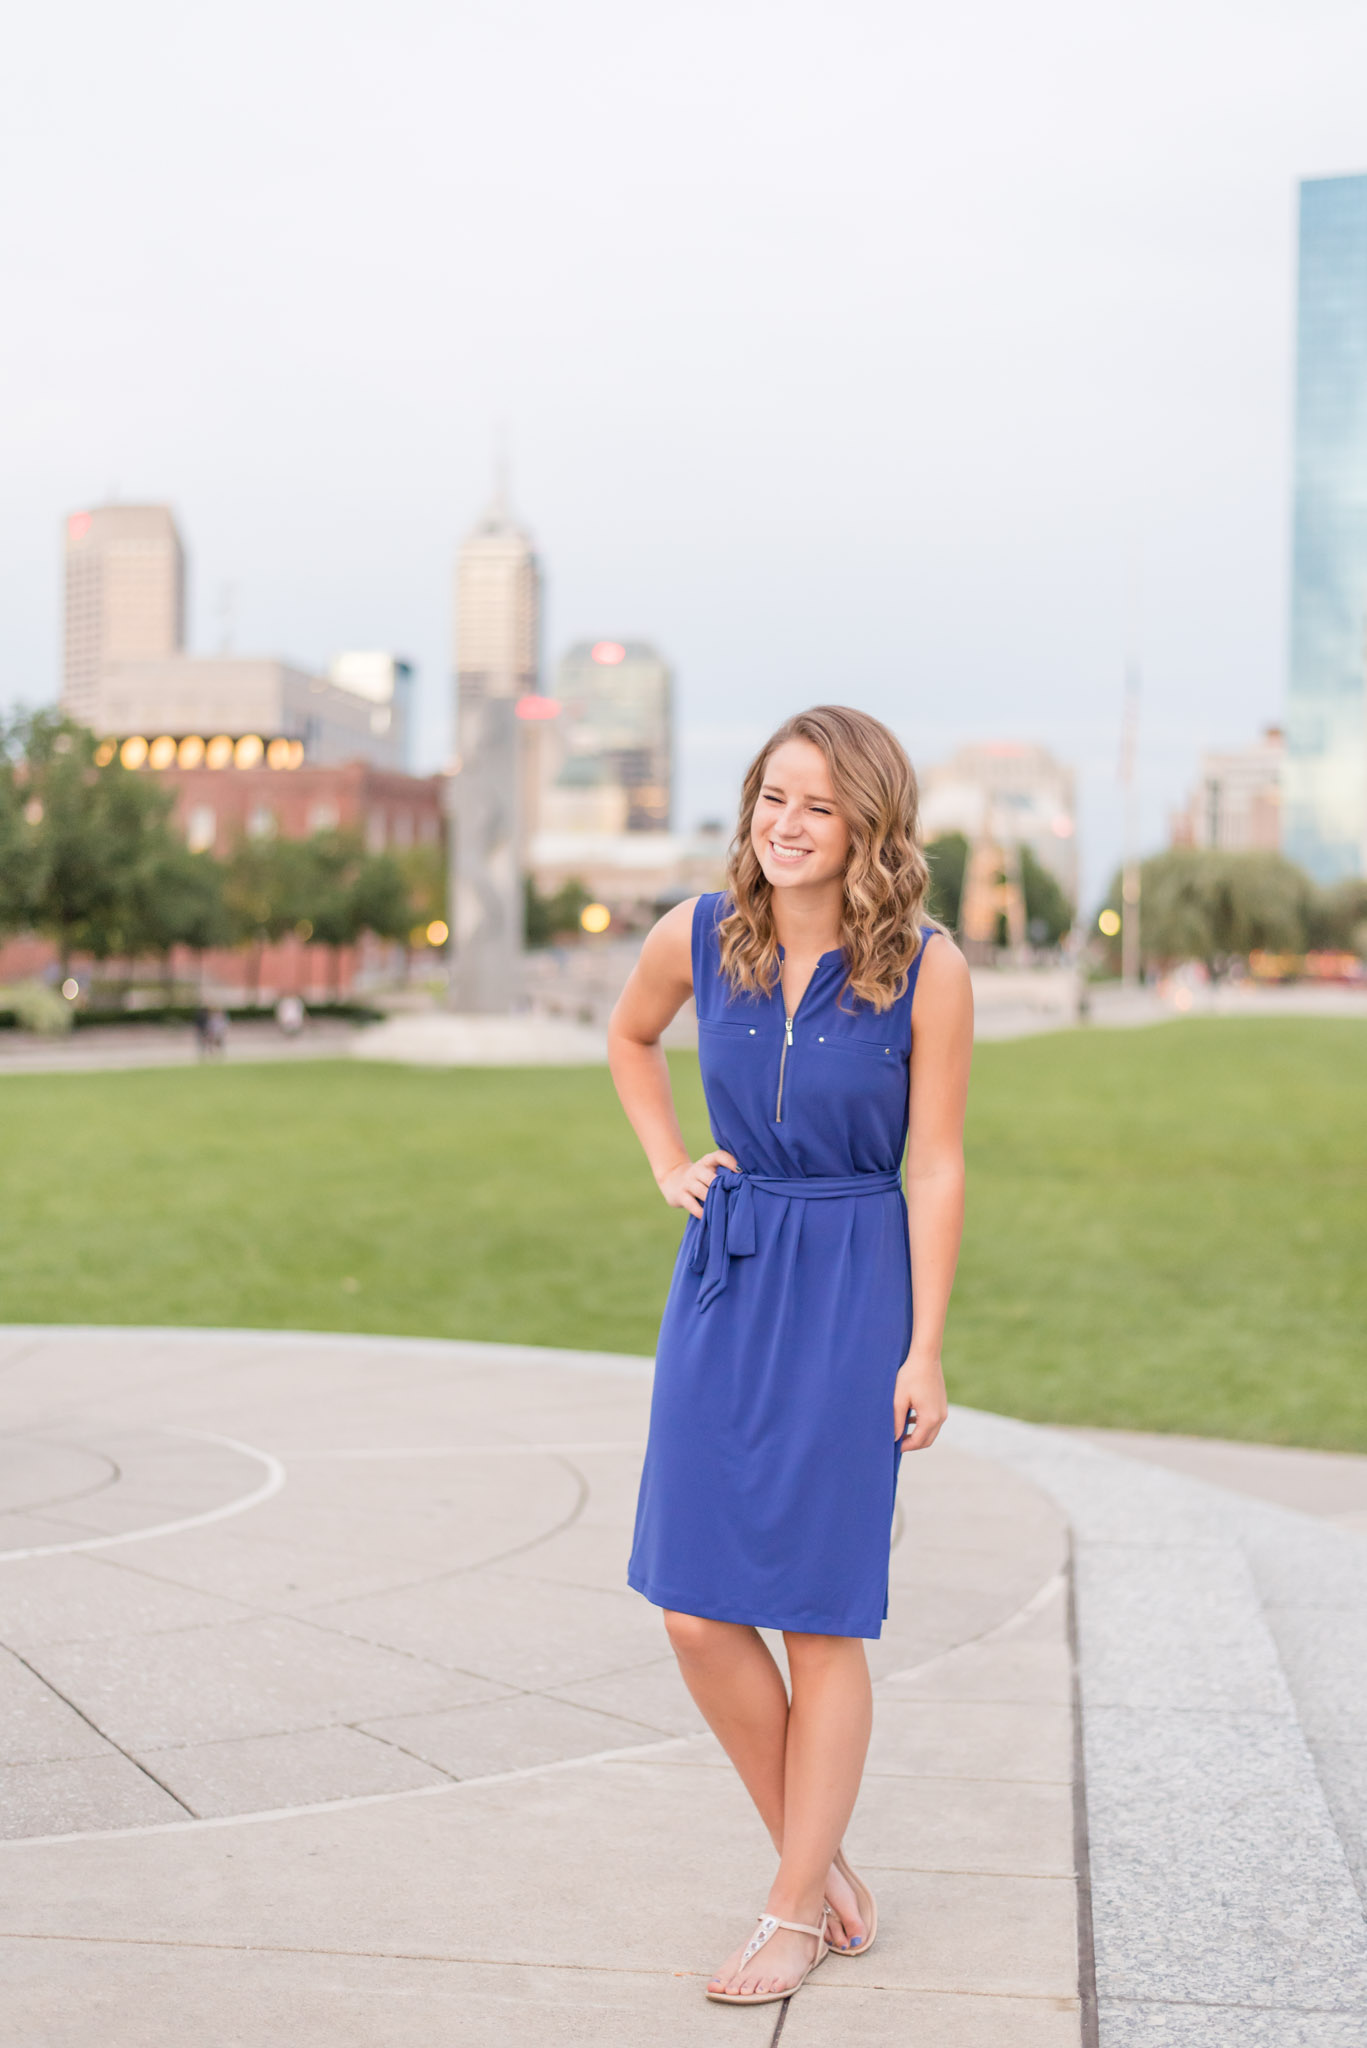 High School Senior laughs with Indianapolis backdrop